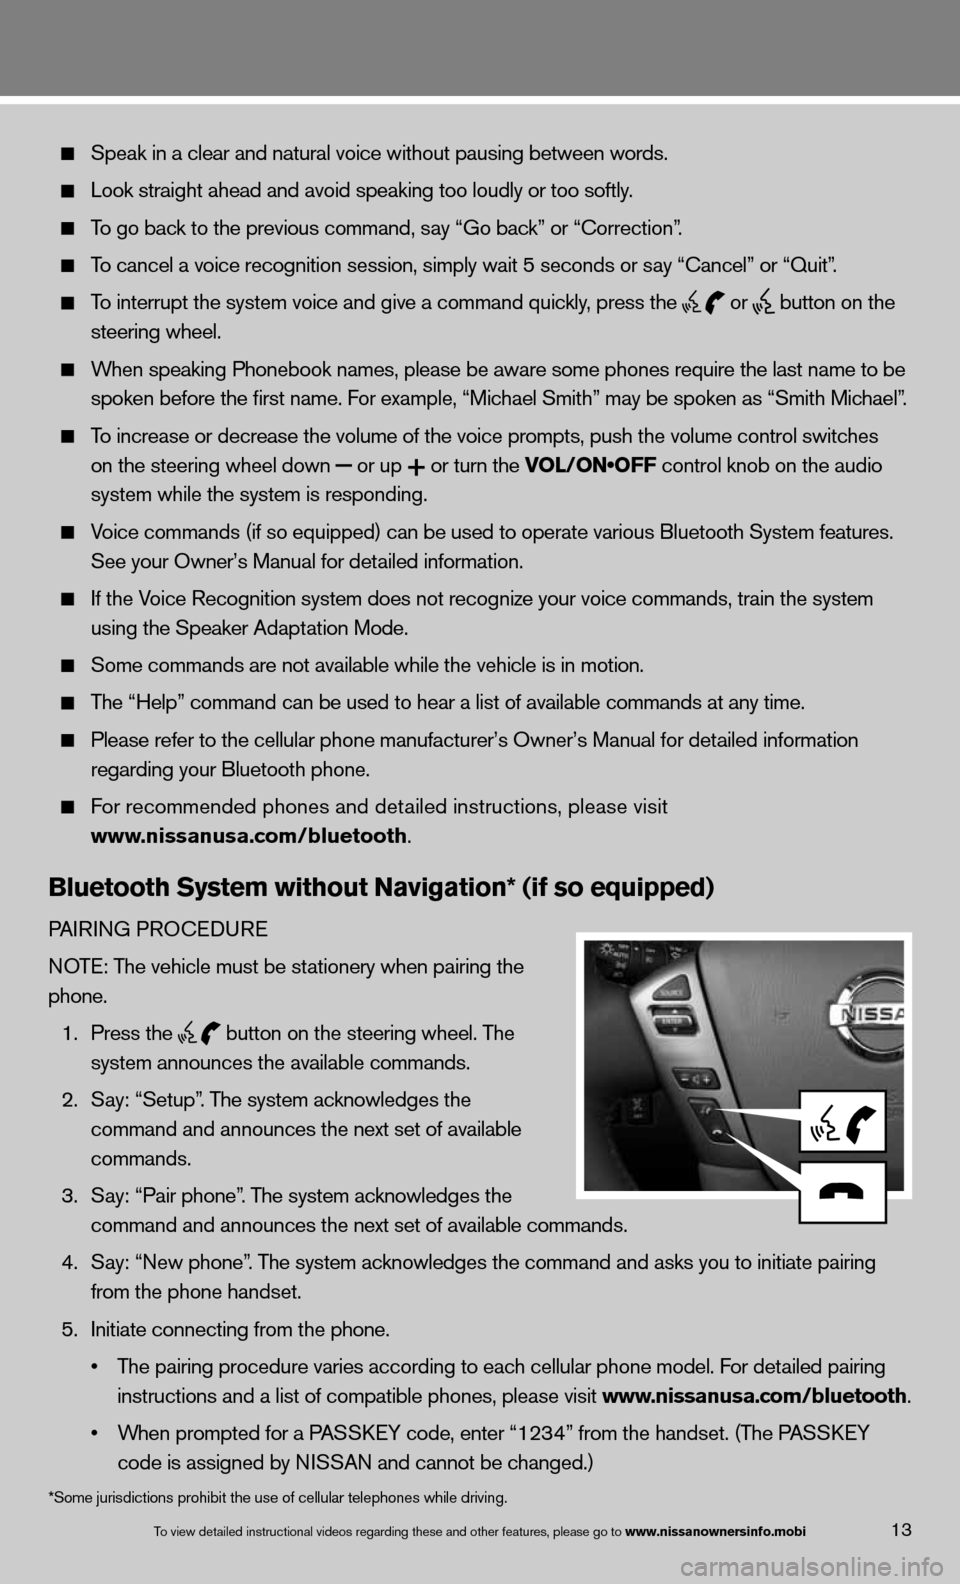 NISSAN ARMADA 2013 1.G Quick Reference Guide 13To view detailed in\fstructional videos\f regarding these a\fnd other features\f \fplease go to www.nissanownersin\Sfo.mobi
  Speak in a clear and natural voice without pausing between words.  
 
  